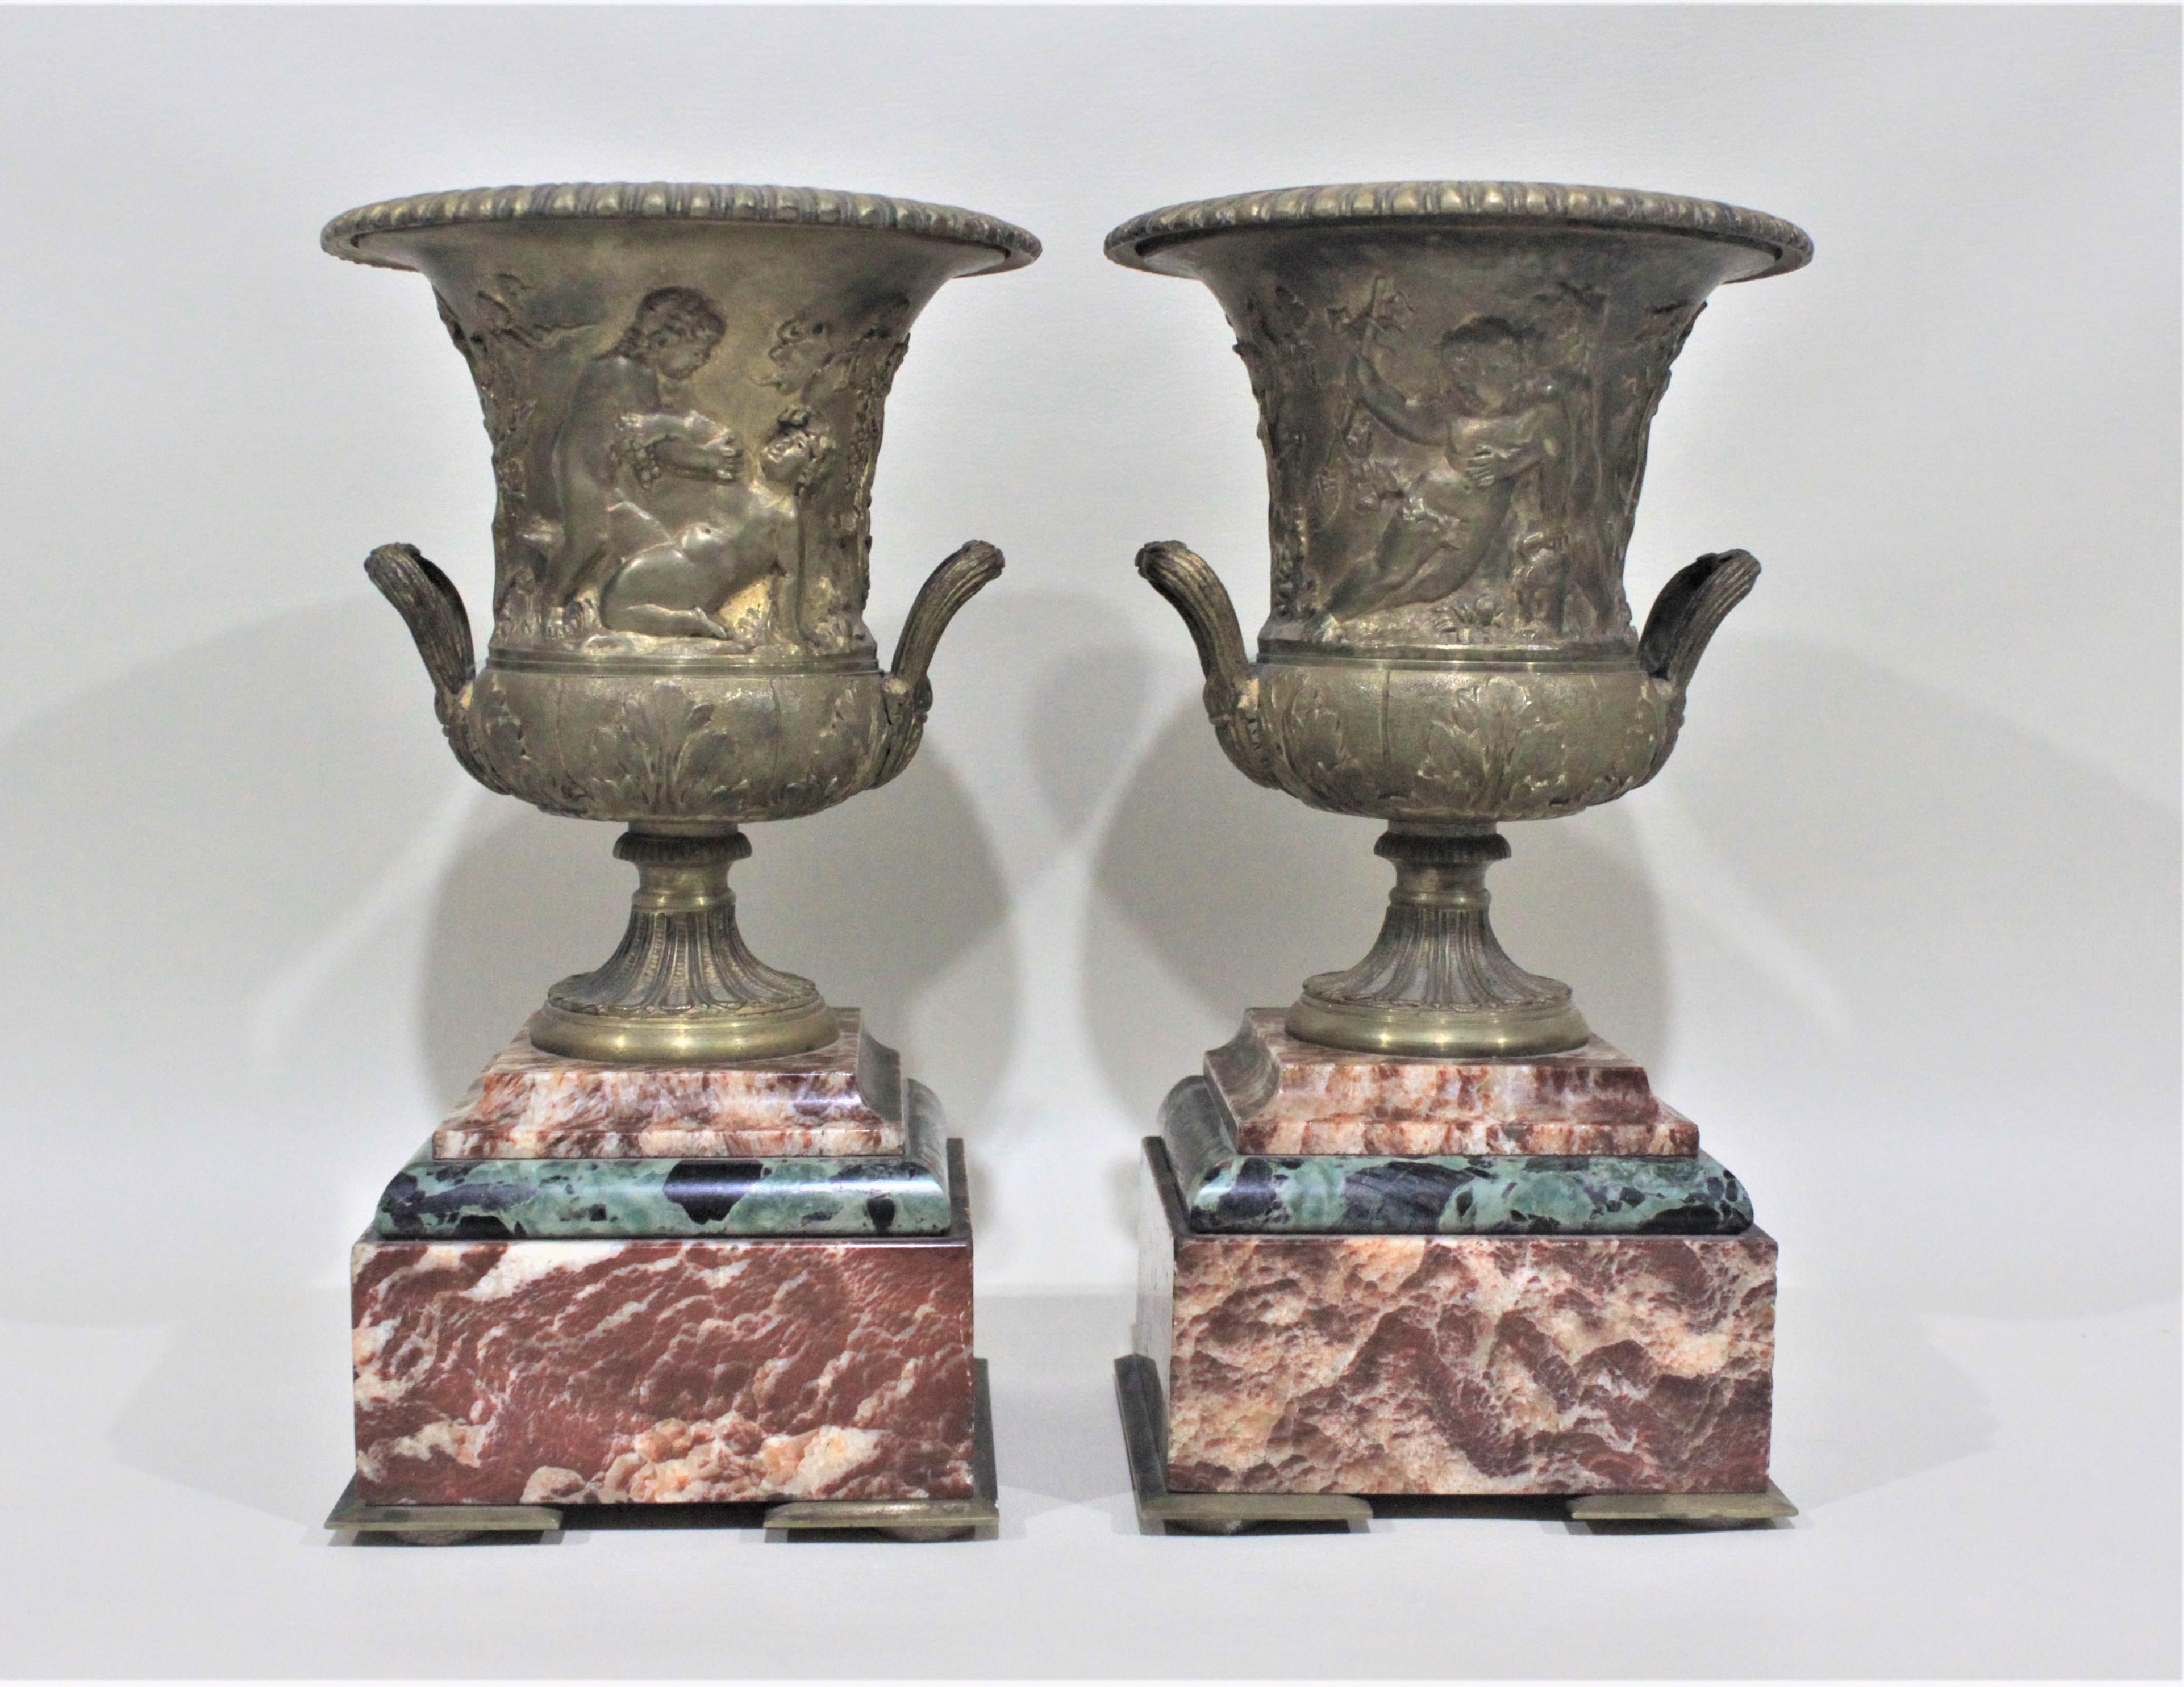 This pair of gilt bronze and marble urns or garnitures are ornately cast with a Neoclassical motif on both the front and back which sit on a base of alternating pink and black polished marble slabs. This matched pair of urns likely date from the